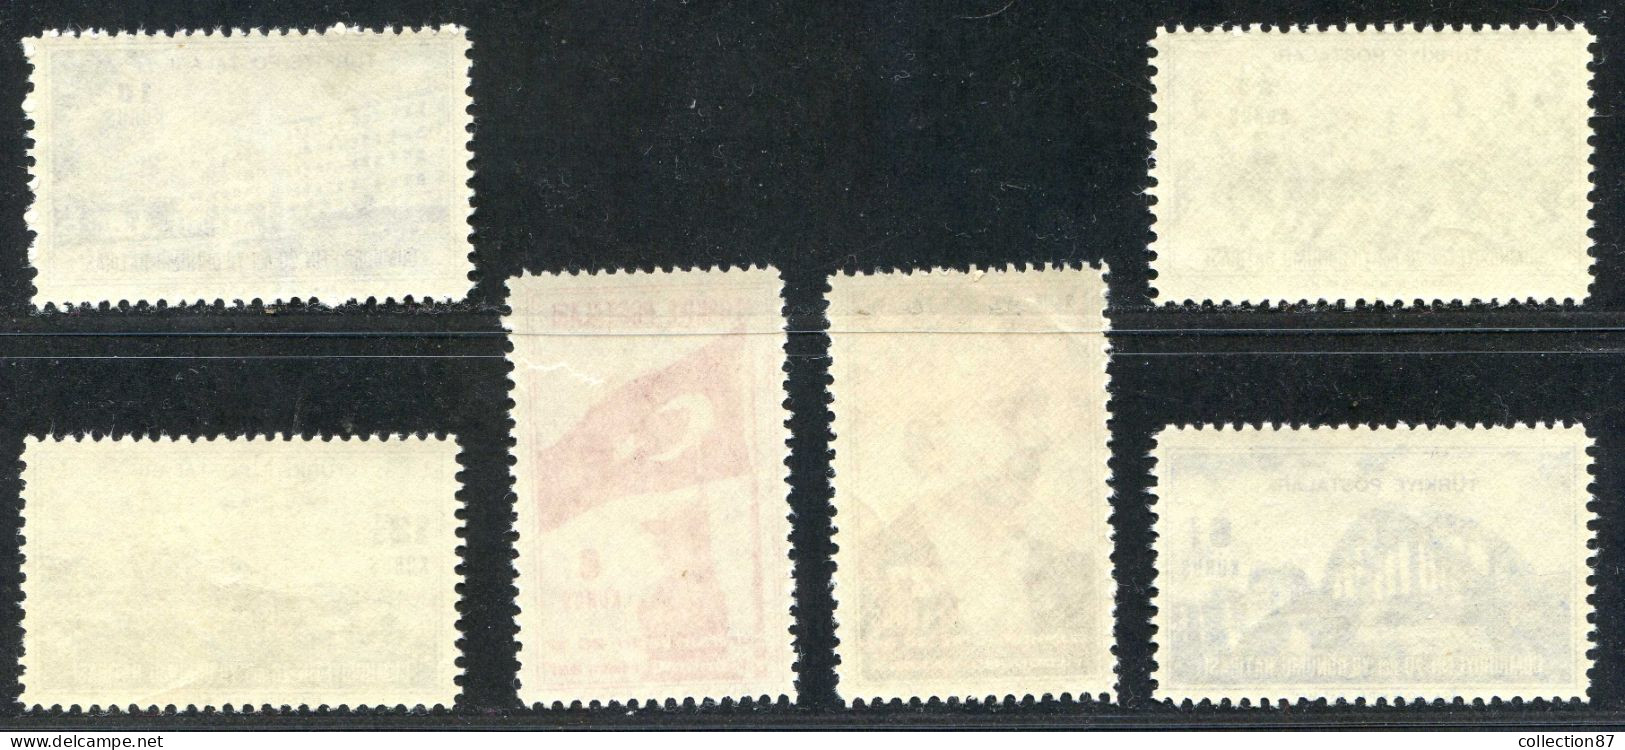 REF 091 > TURQUIE < Yv N° 1020 à 1025 * * < Neuf Luxe Dos Visible MNH * * > President Ismet Inönü - Unused Stamps